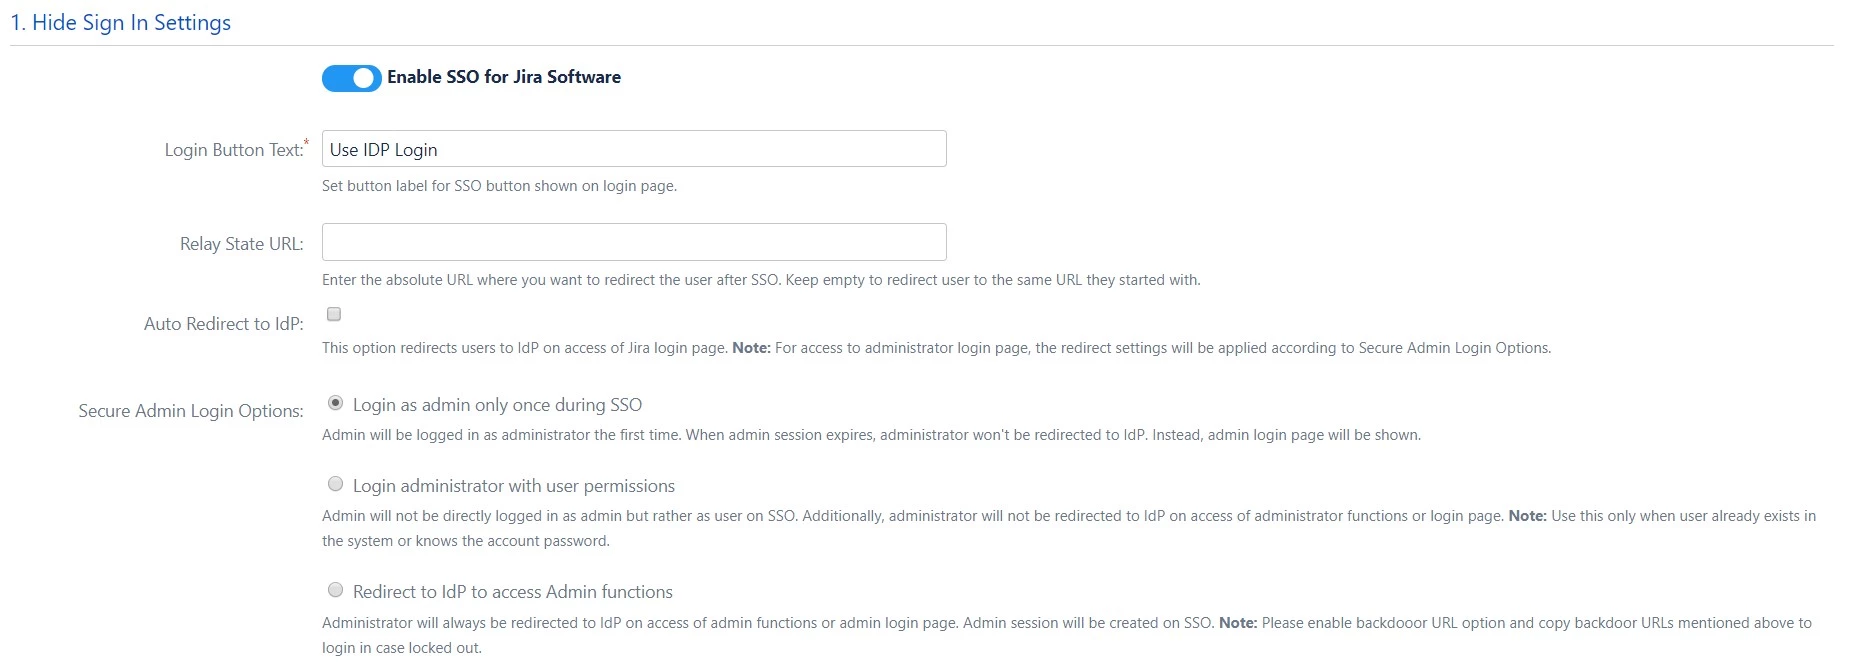 Sign In Seetings - SSO Login with WordPress